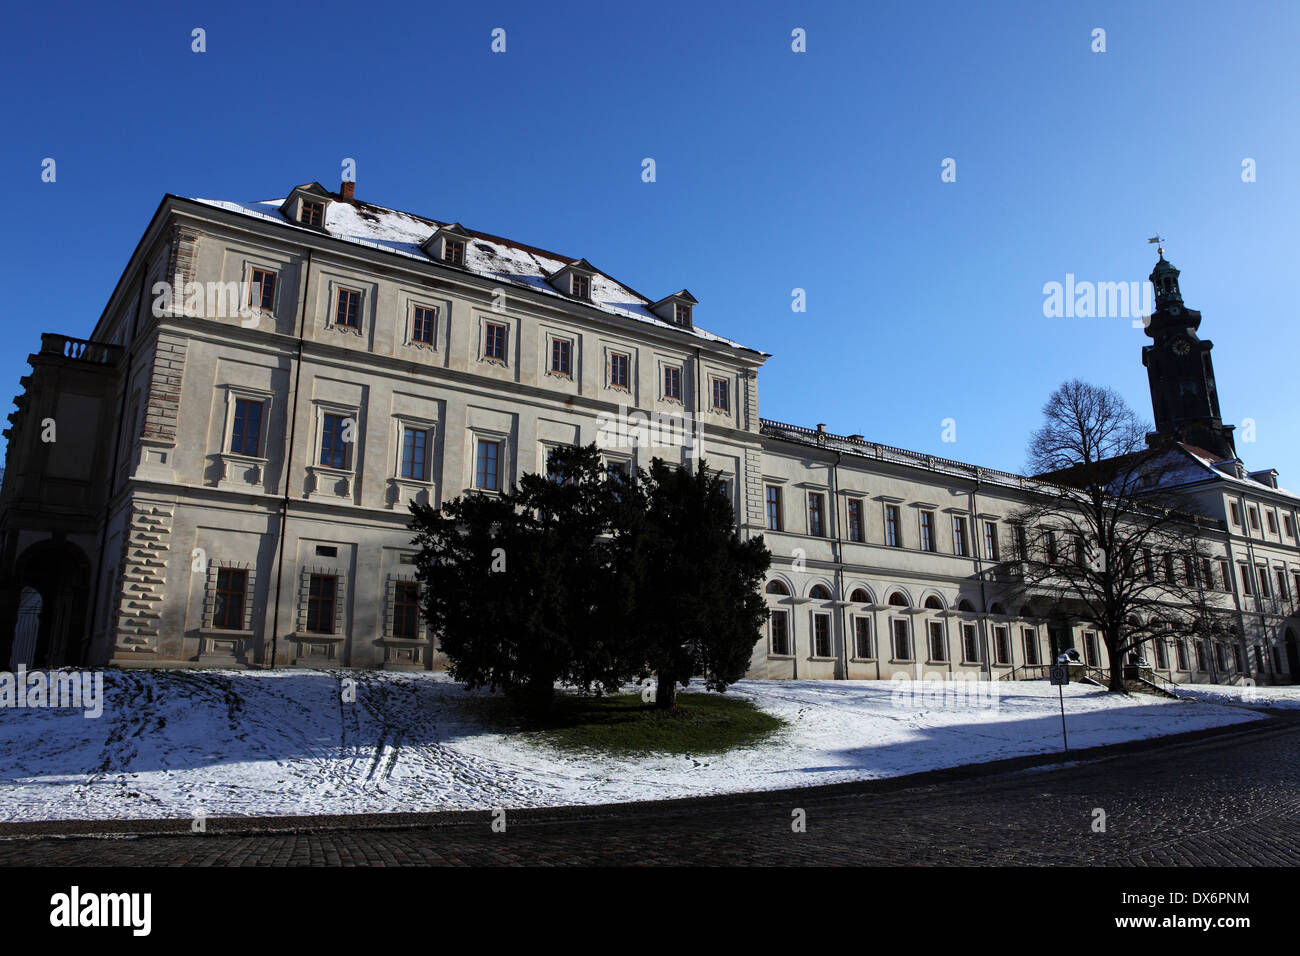 The Schlossmuseum (Palace Museum) in Weimar, Germany. Stock Photo